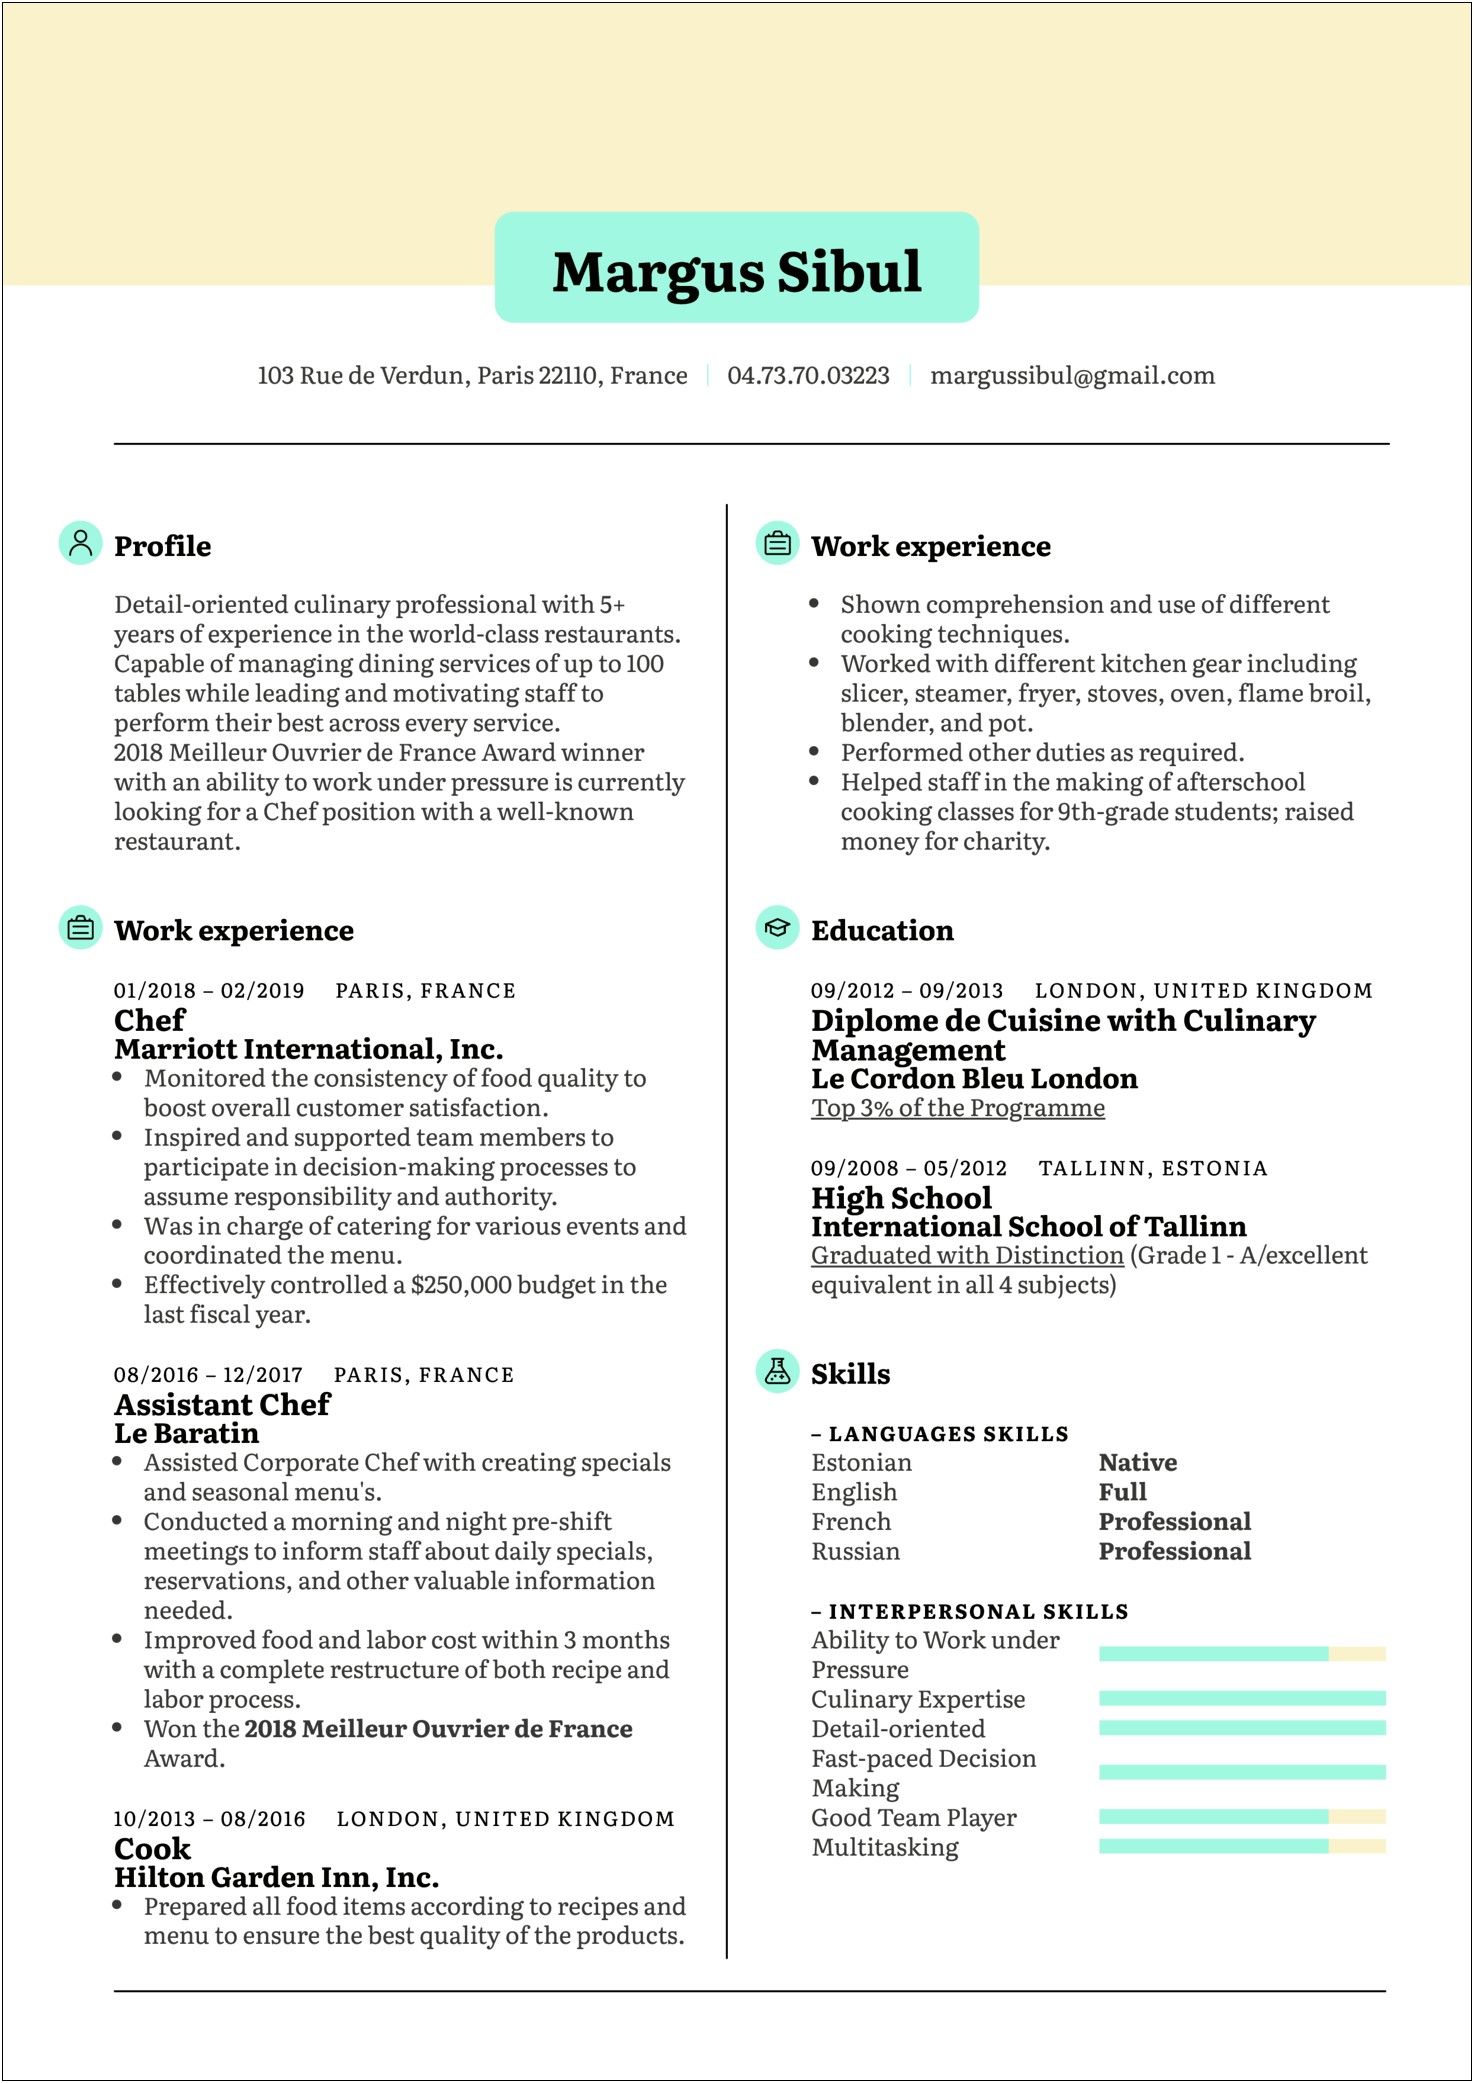 Resume Skills And Interests Cooking